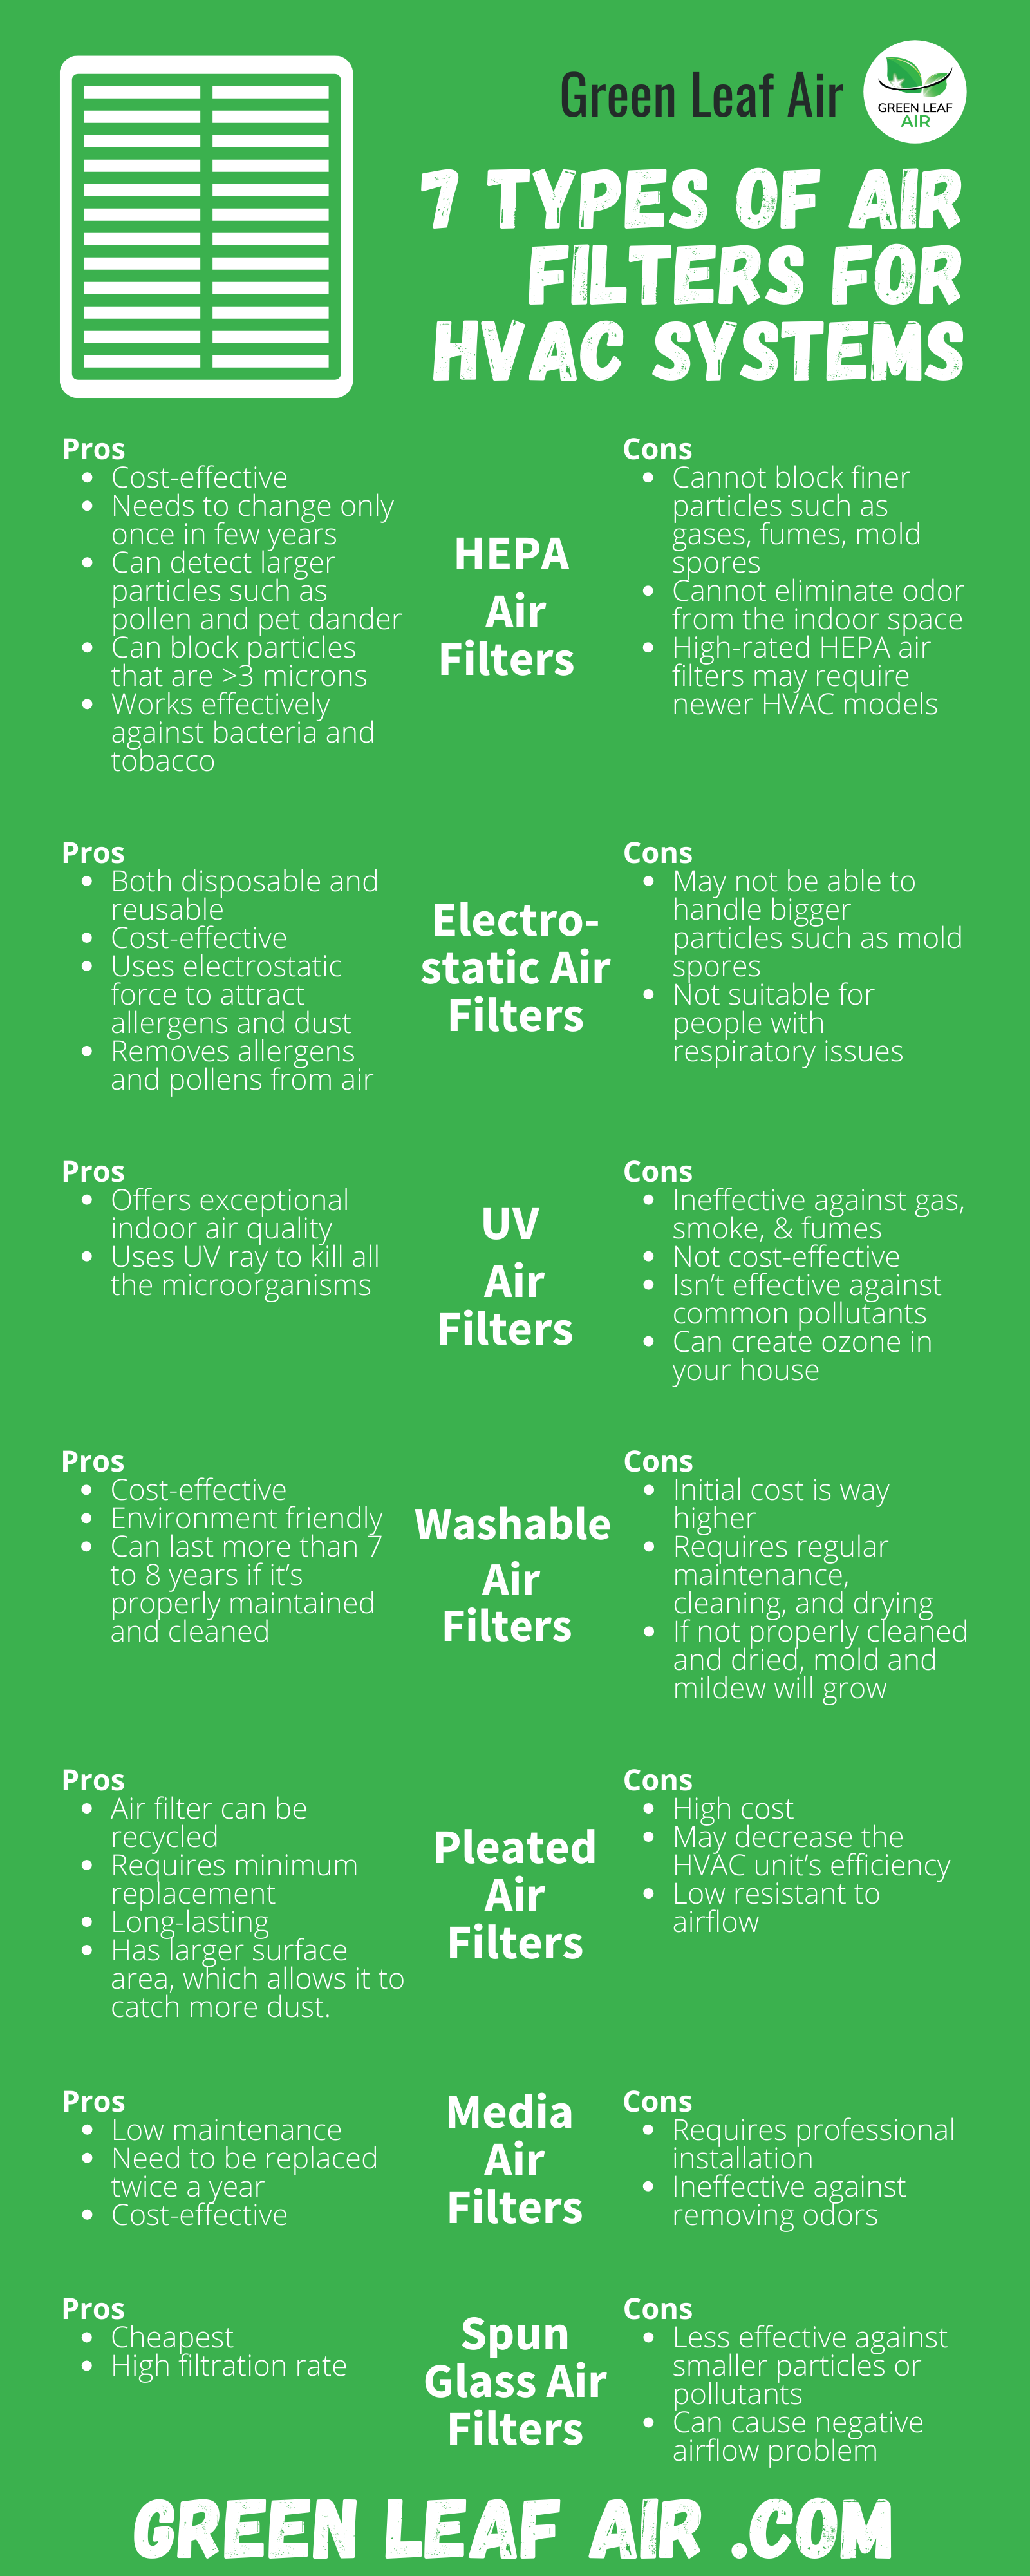 7 Types of Air Filters for HVAC Systems